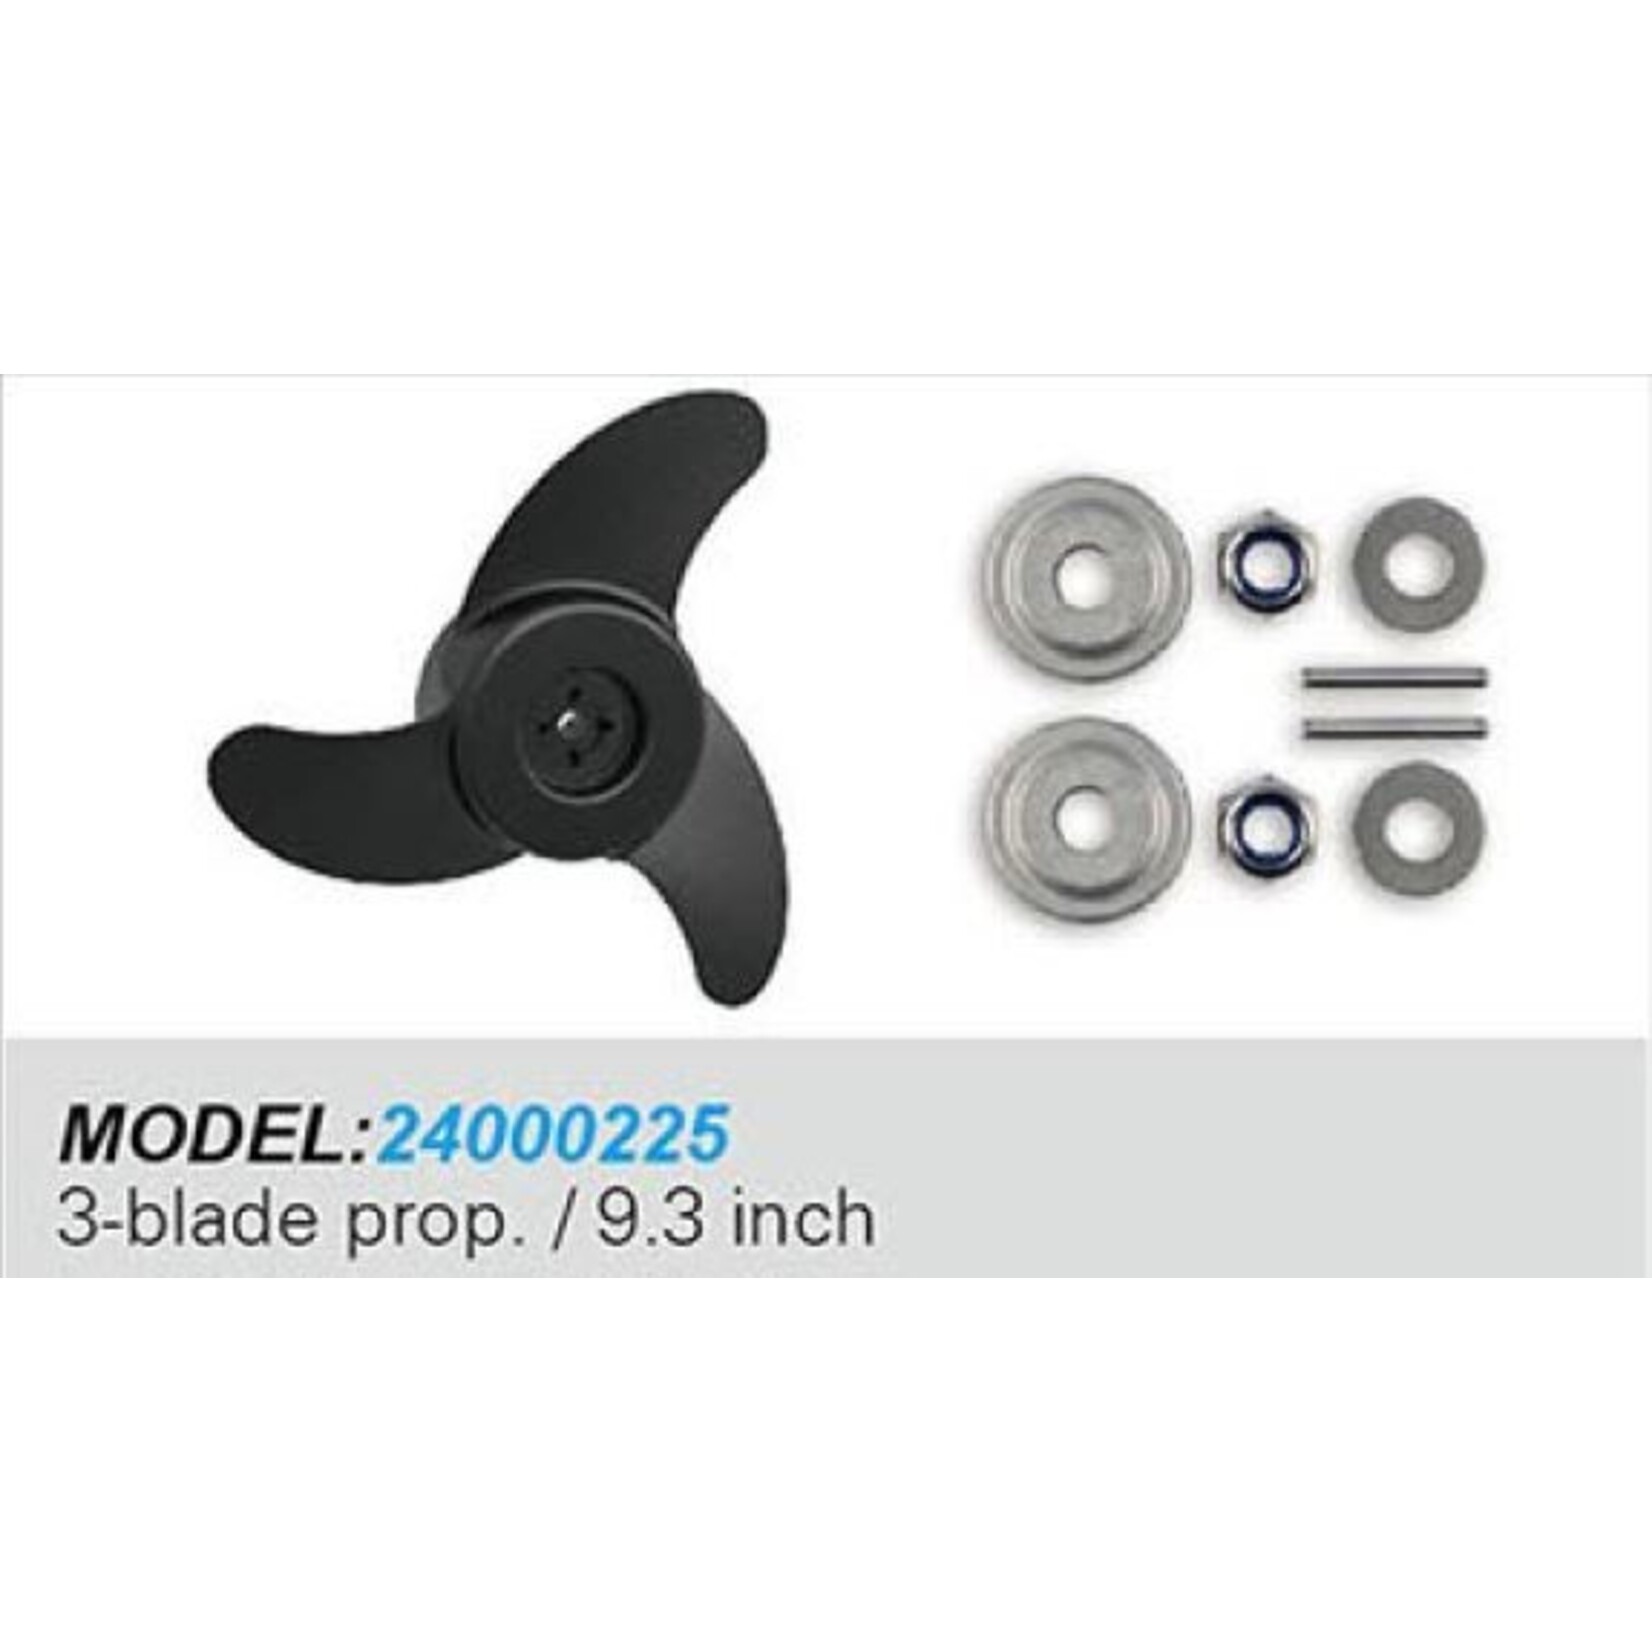 Haswing Propeller and Screws